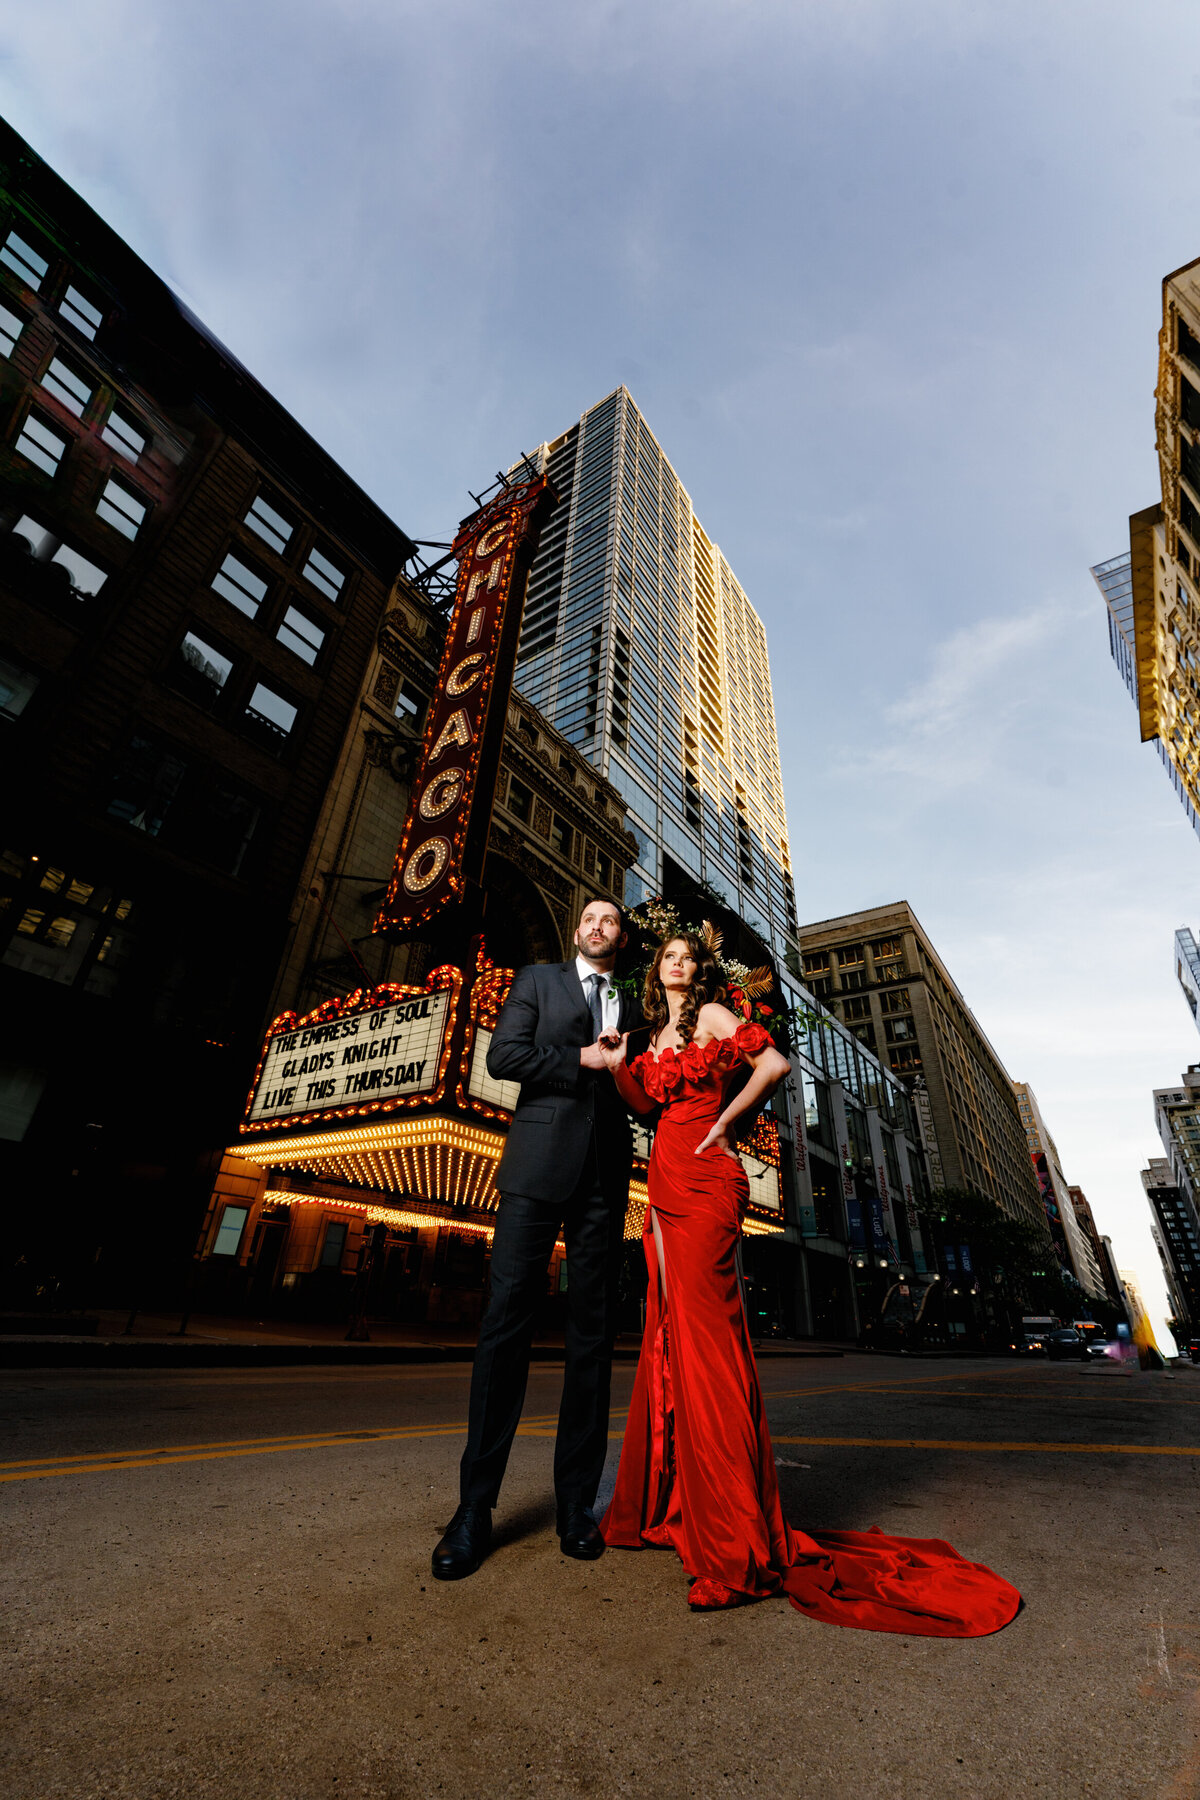 Aspen-Avenue-Chicago-Wedding-Photographer-Union-Station-Chicago-Theater-Engagement-Session-Timeless-Romantic-Red-Dress-Editorial-Stemming-From-Love-Bry-Jean-Artistry-The-Bridal-Collective-True-to-color-Luxury-FAV-121